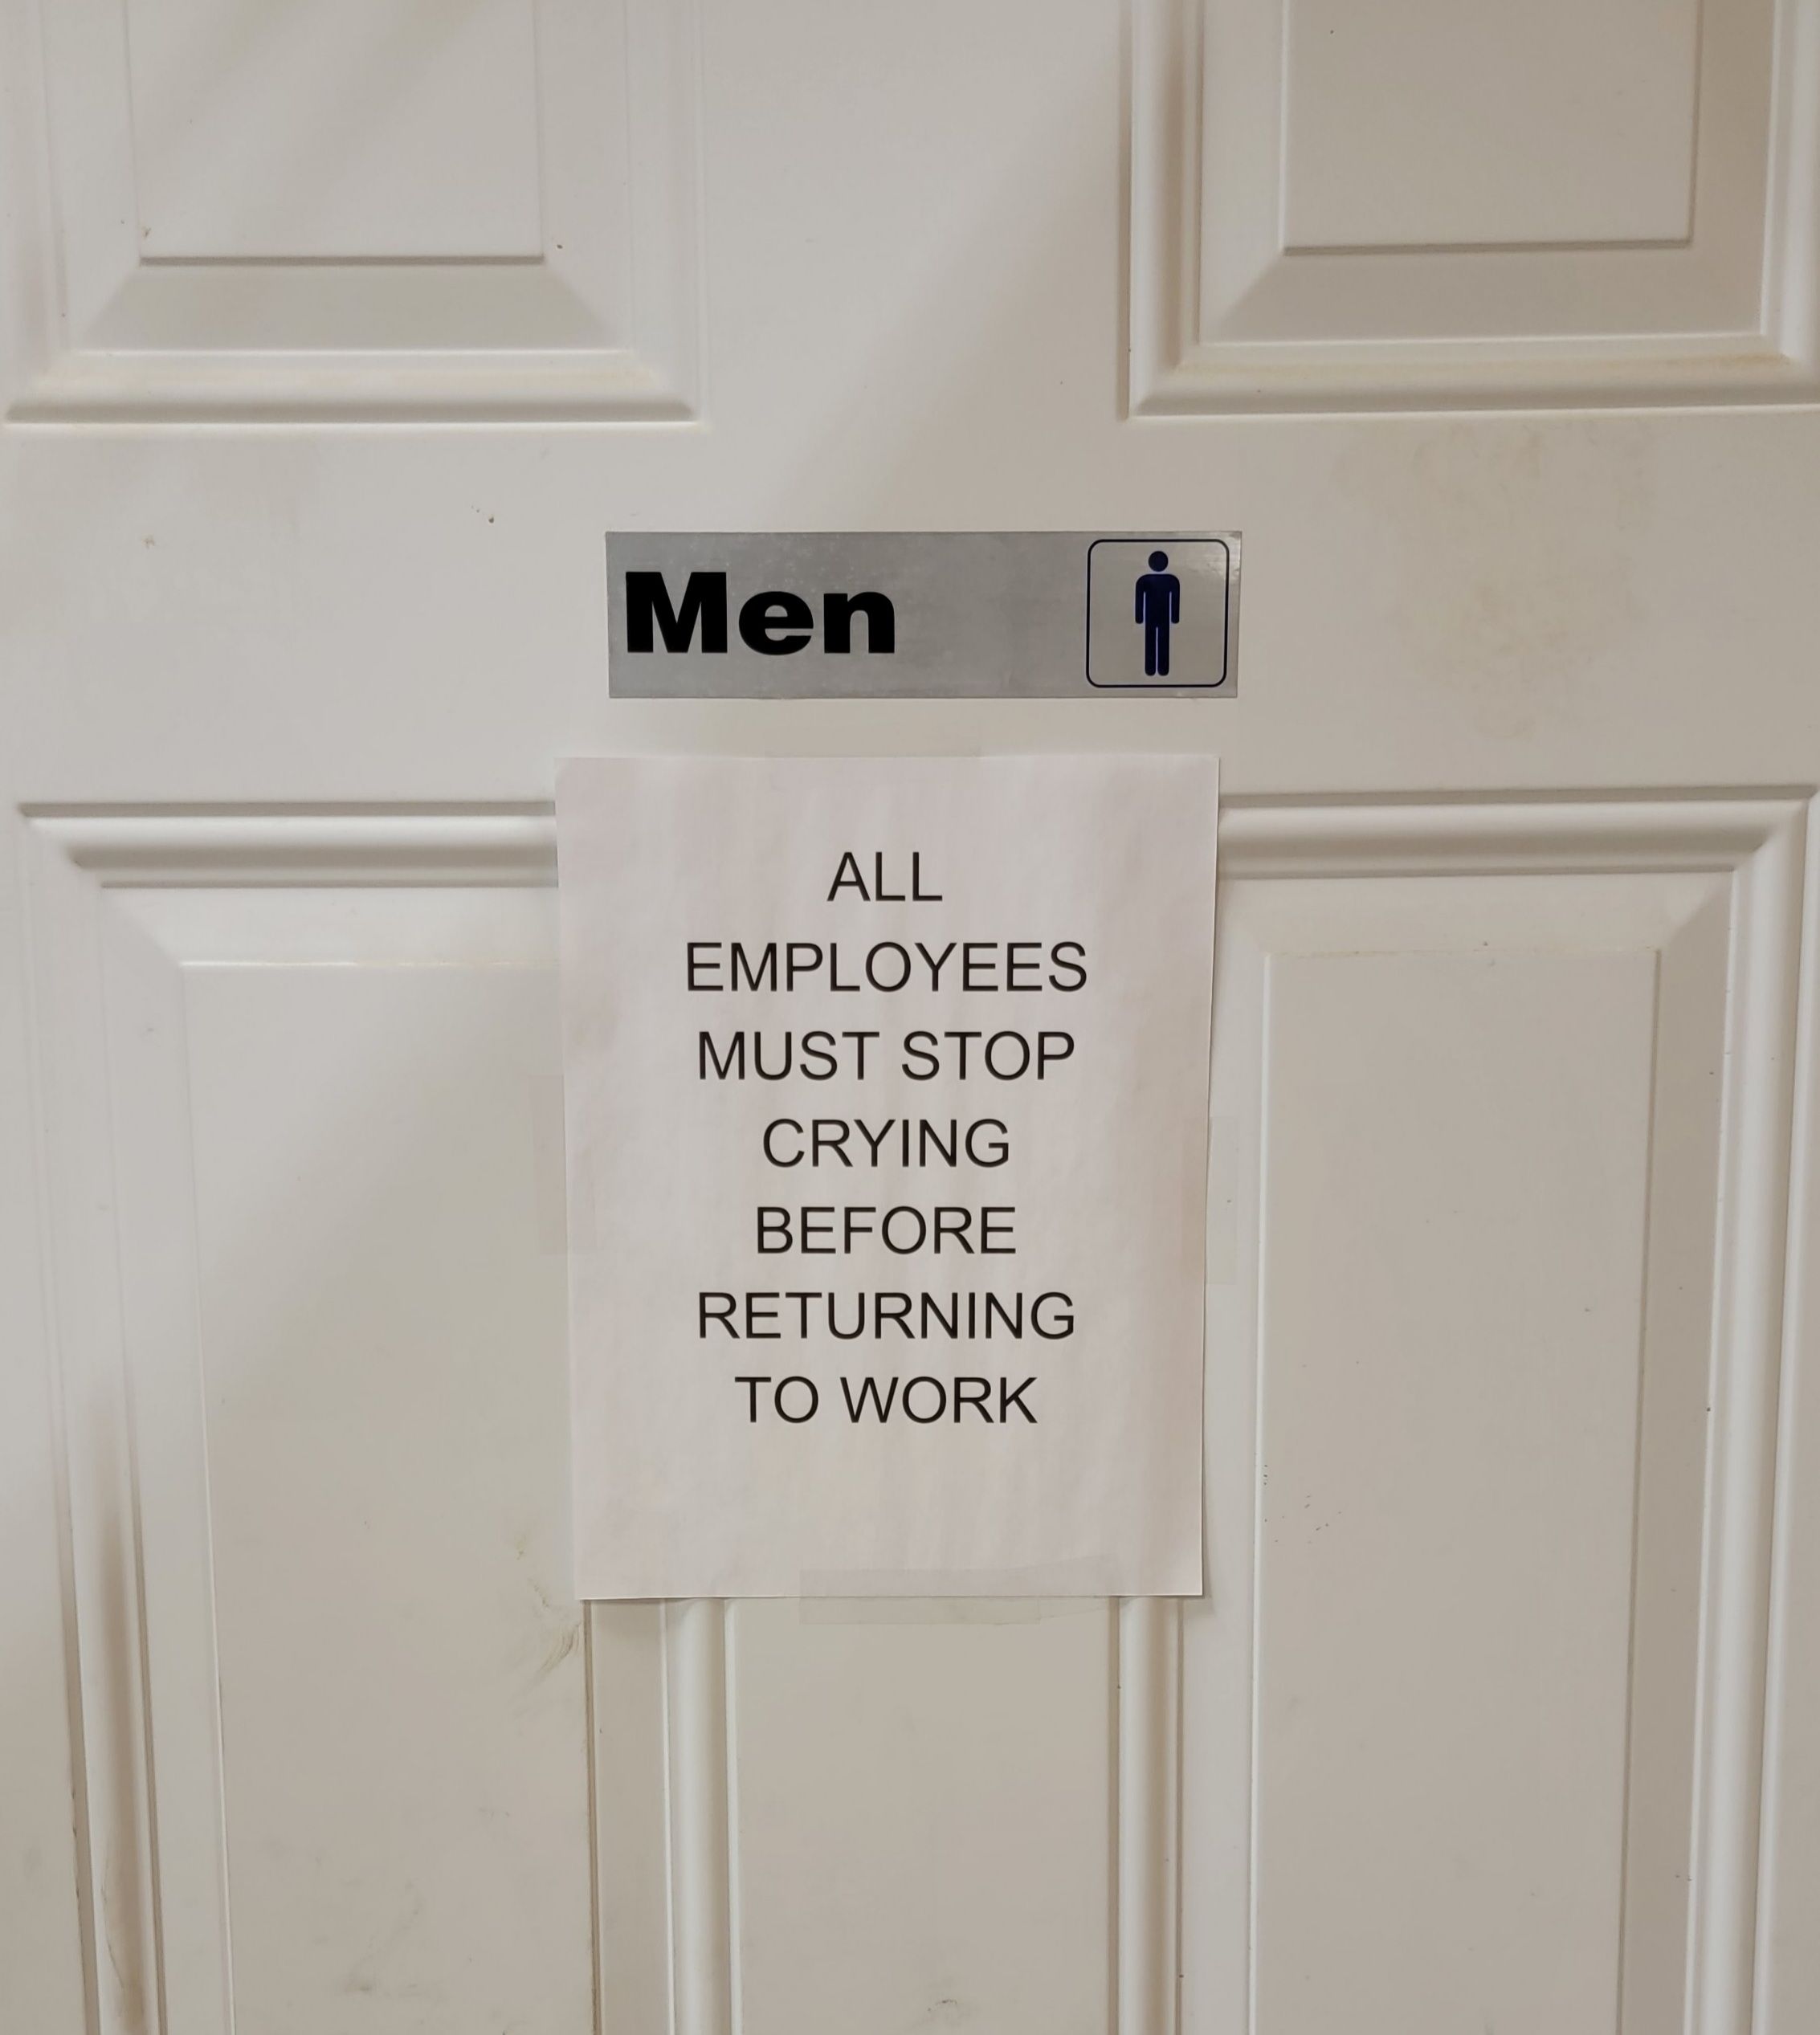 Started a new job, this is posted on the men's bathroom door.